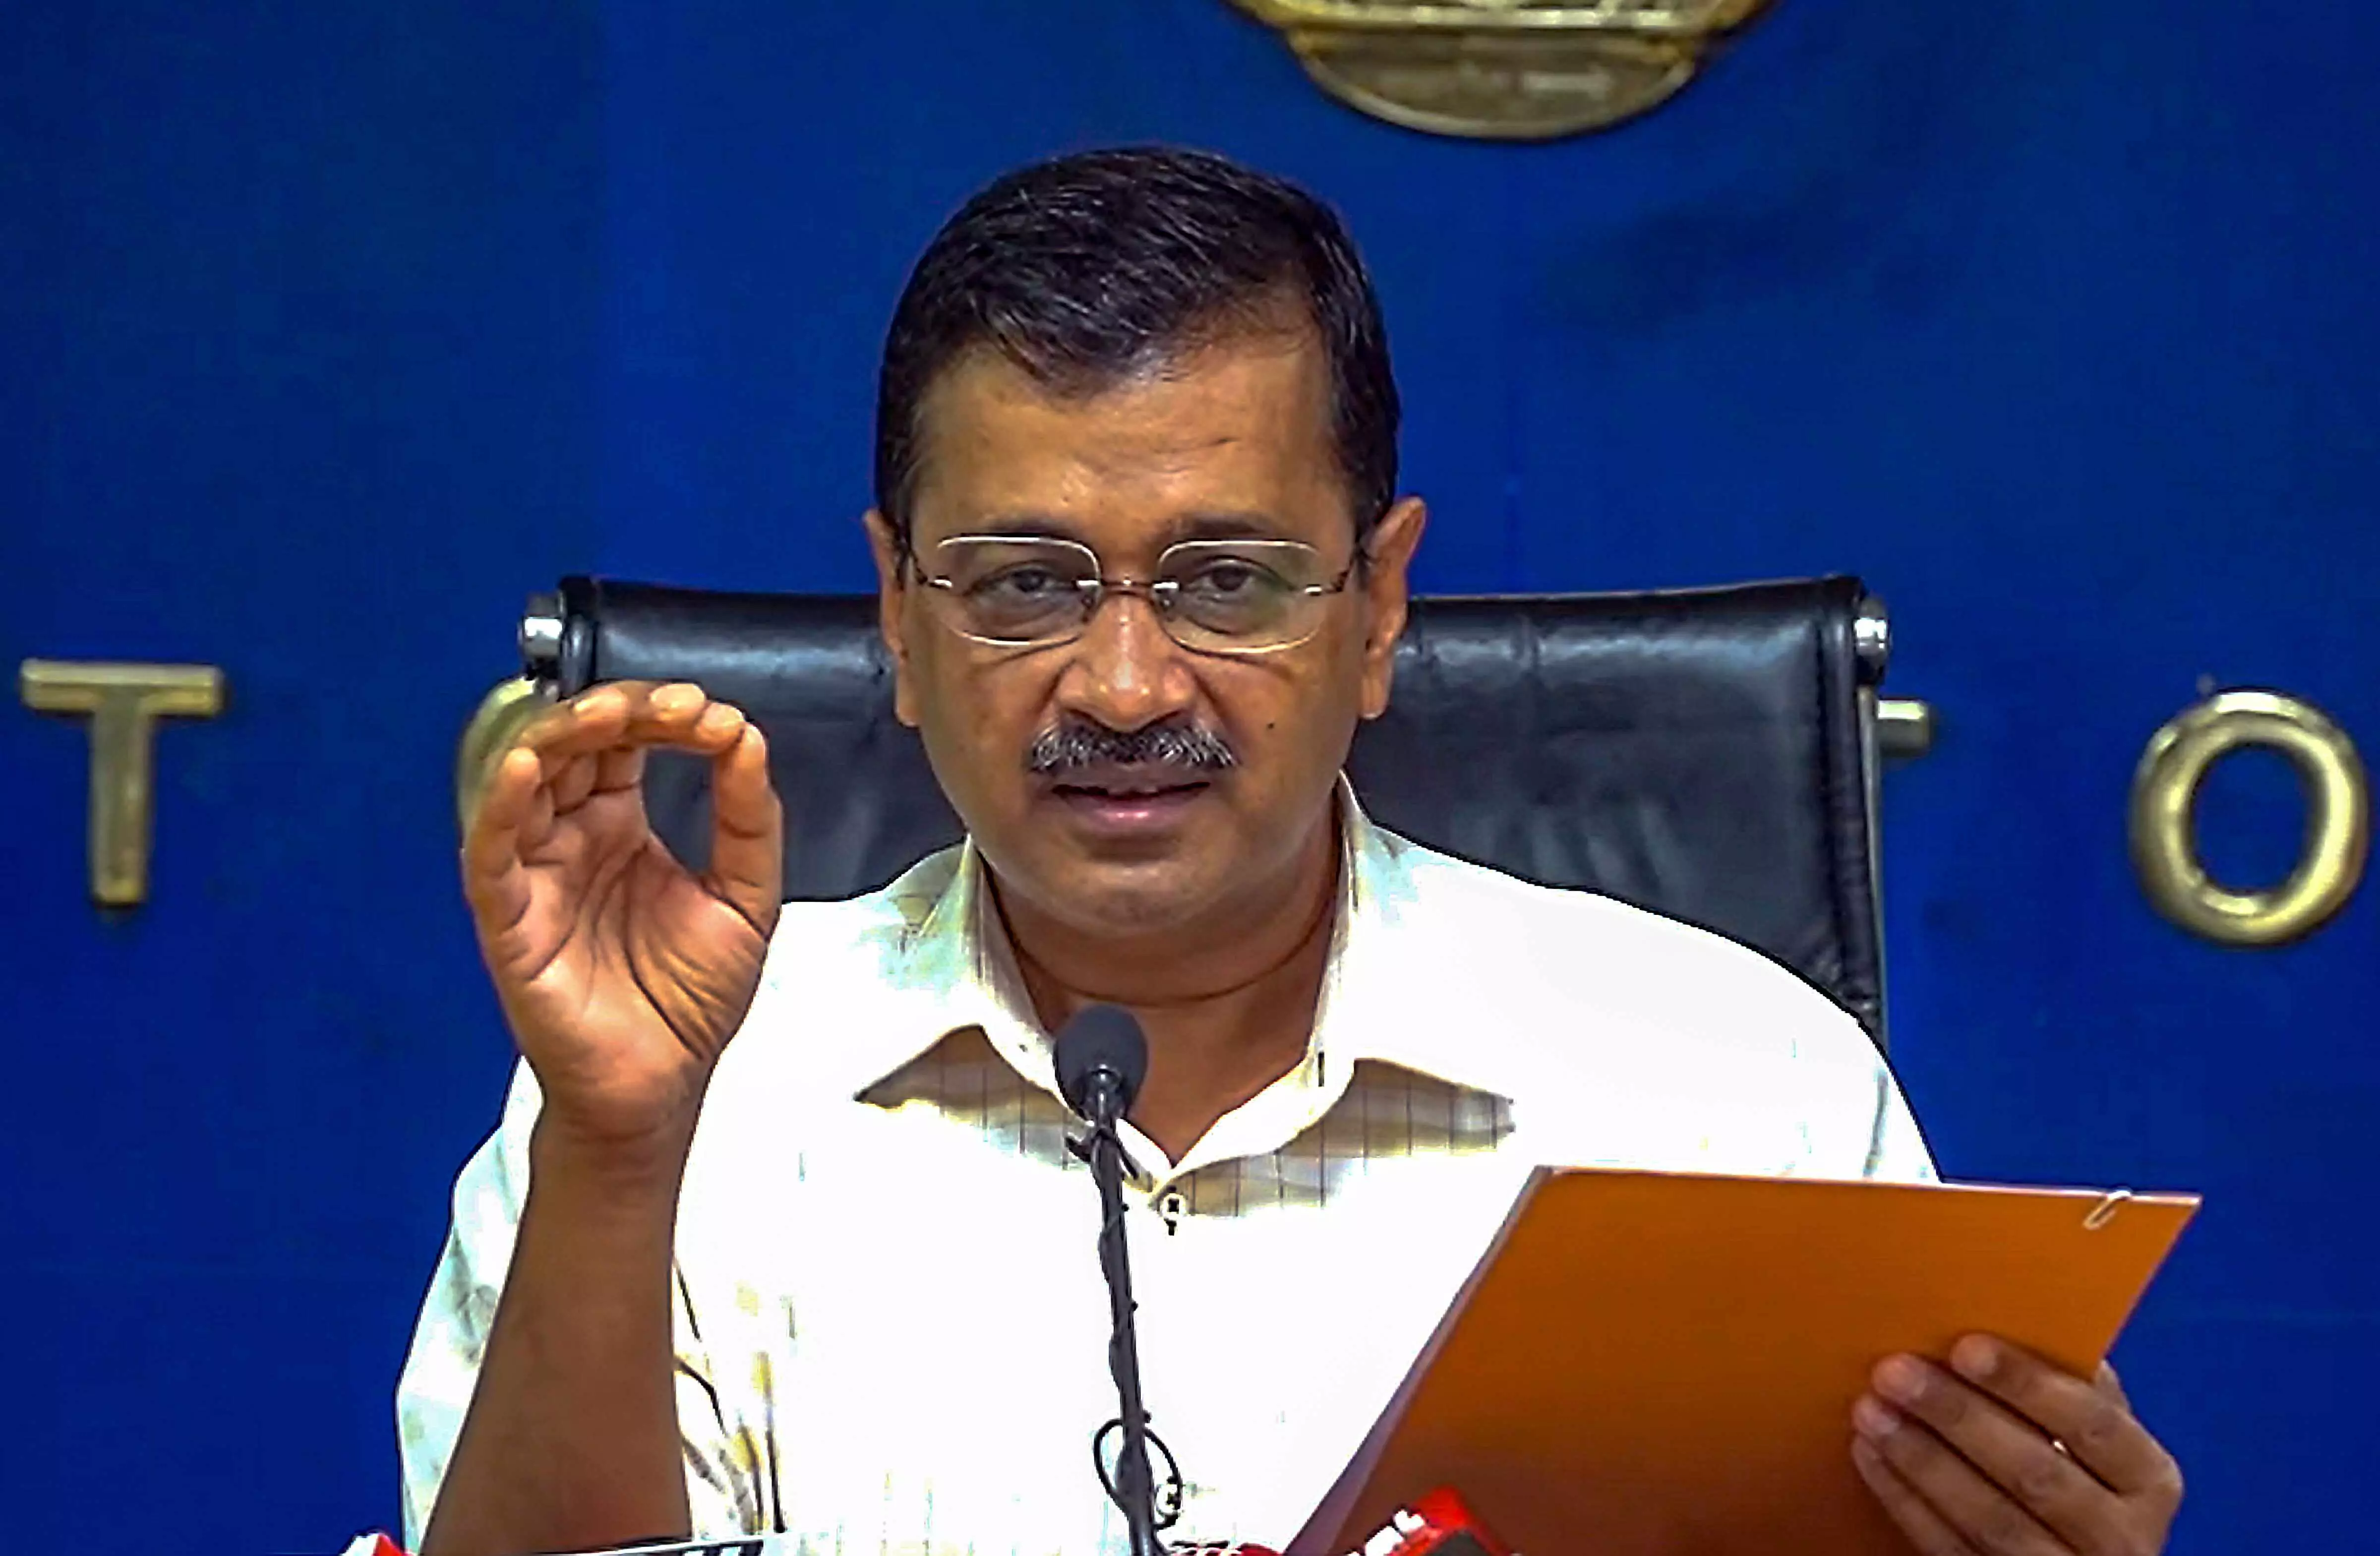 Delhi wouldve been safest had law and order been under AAP govt, says Kejriwal